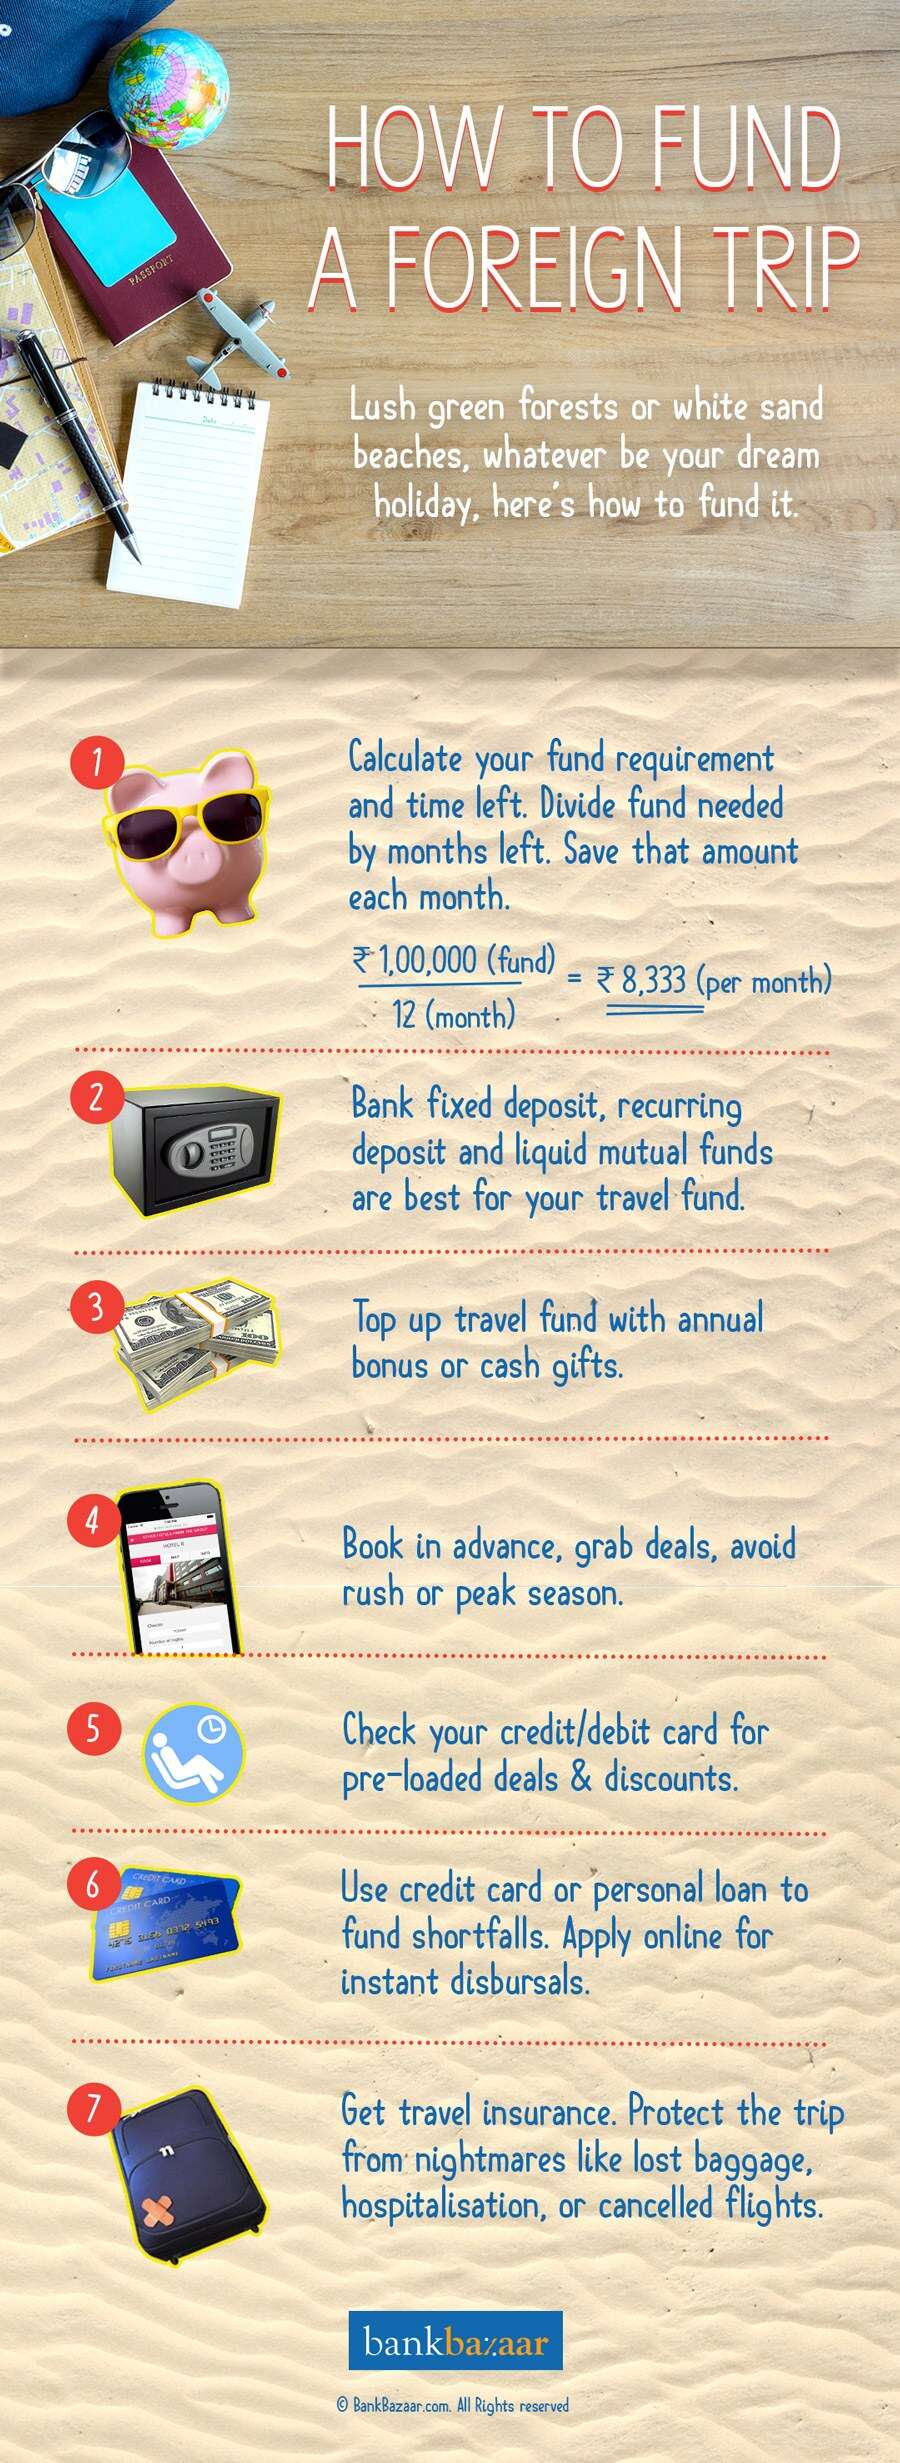 How To Fund A Foreign Trip